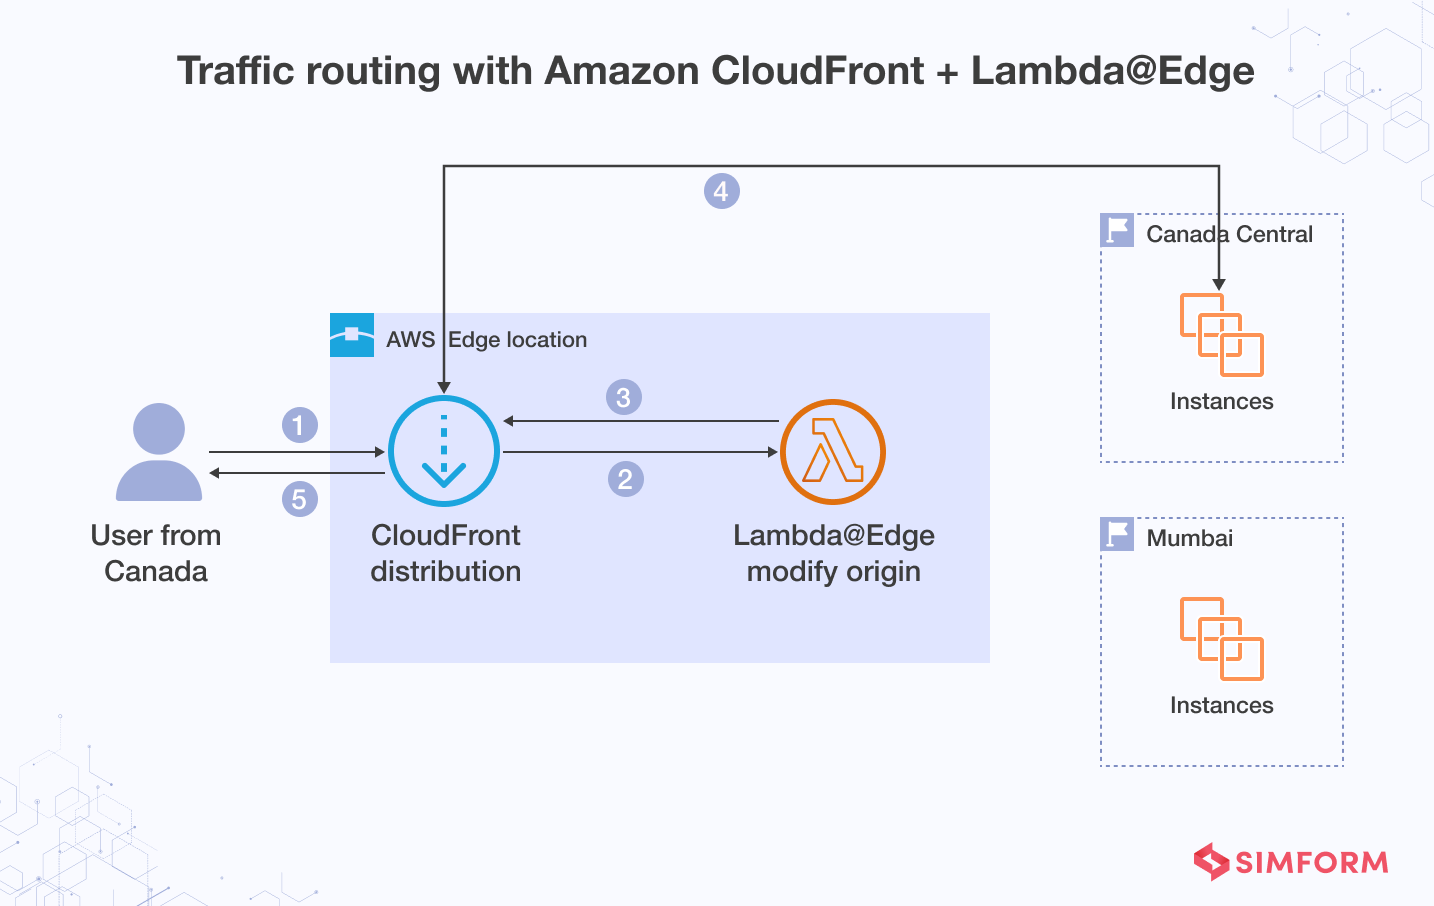 Traffic routing with Amazon CloudFront and Lambda Edge